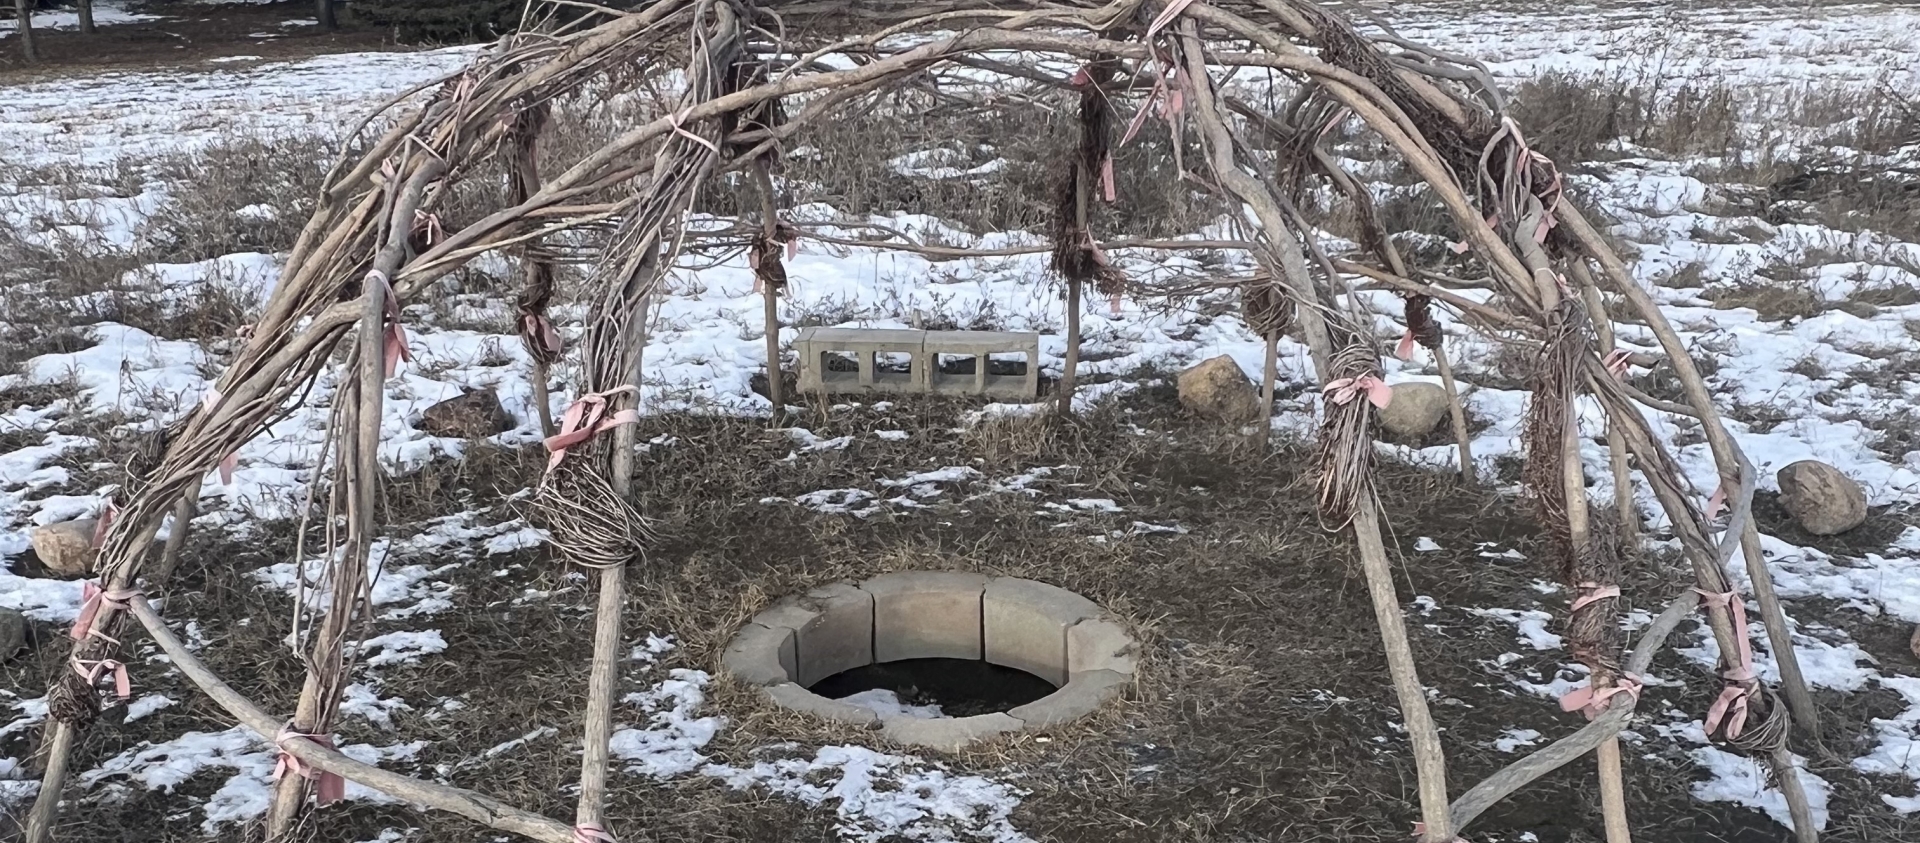 The willow frame of a sweat lodge